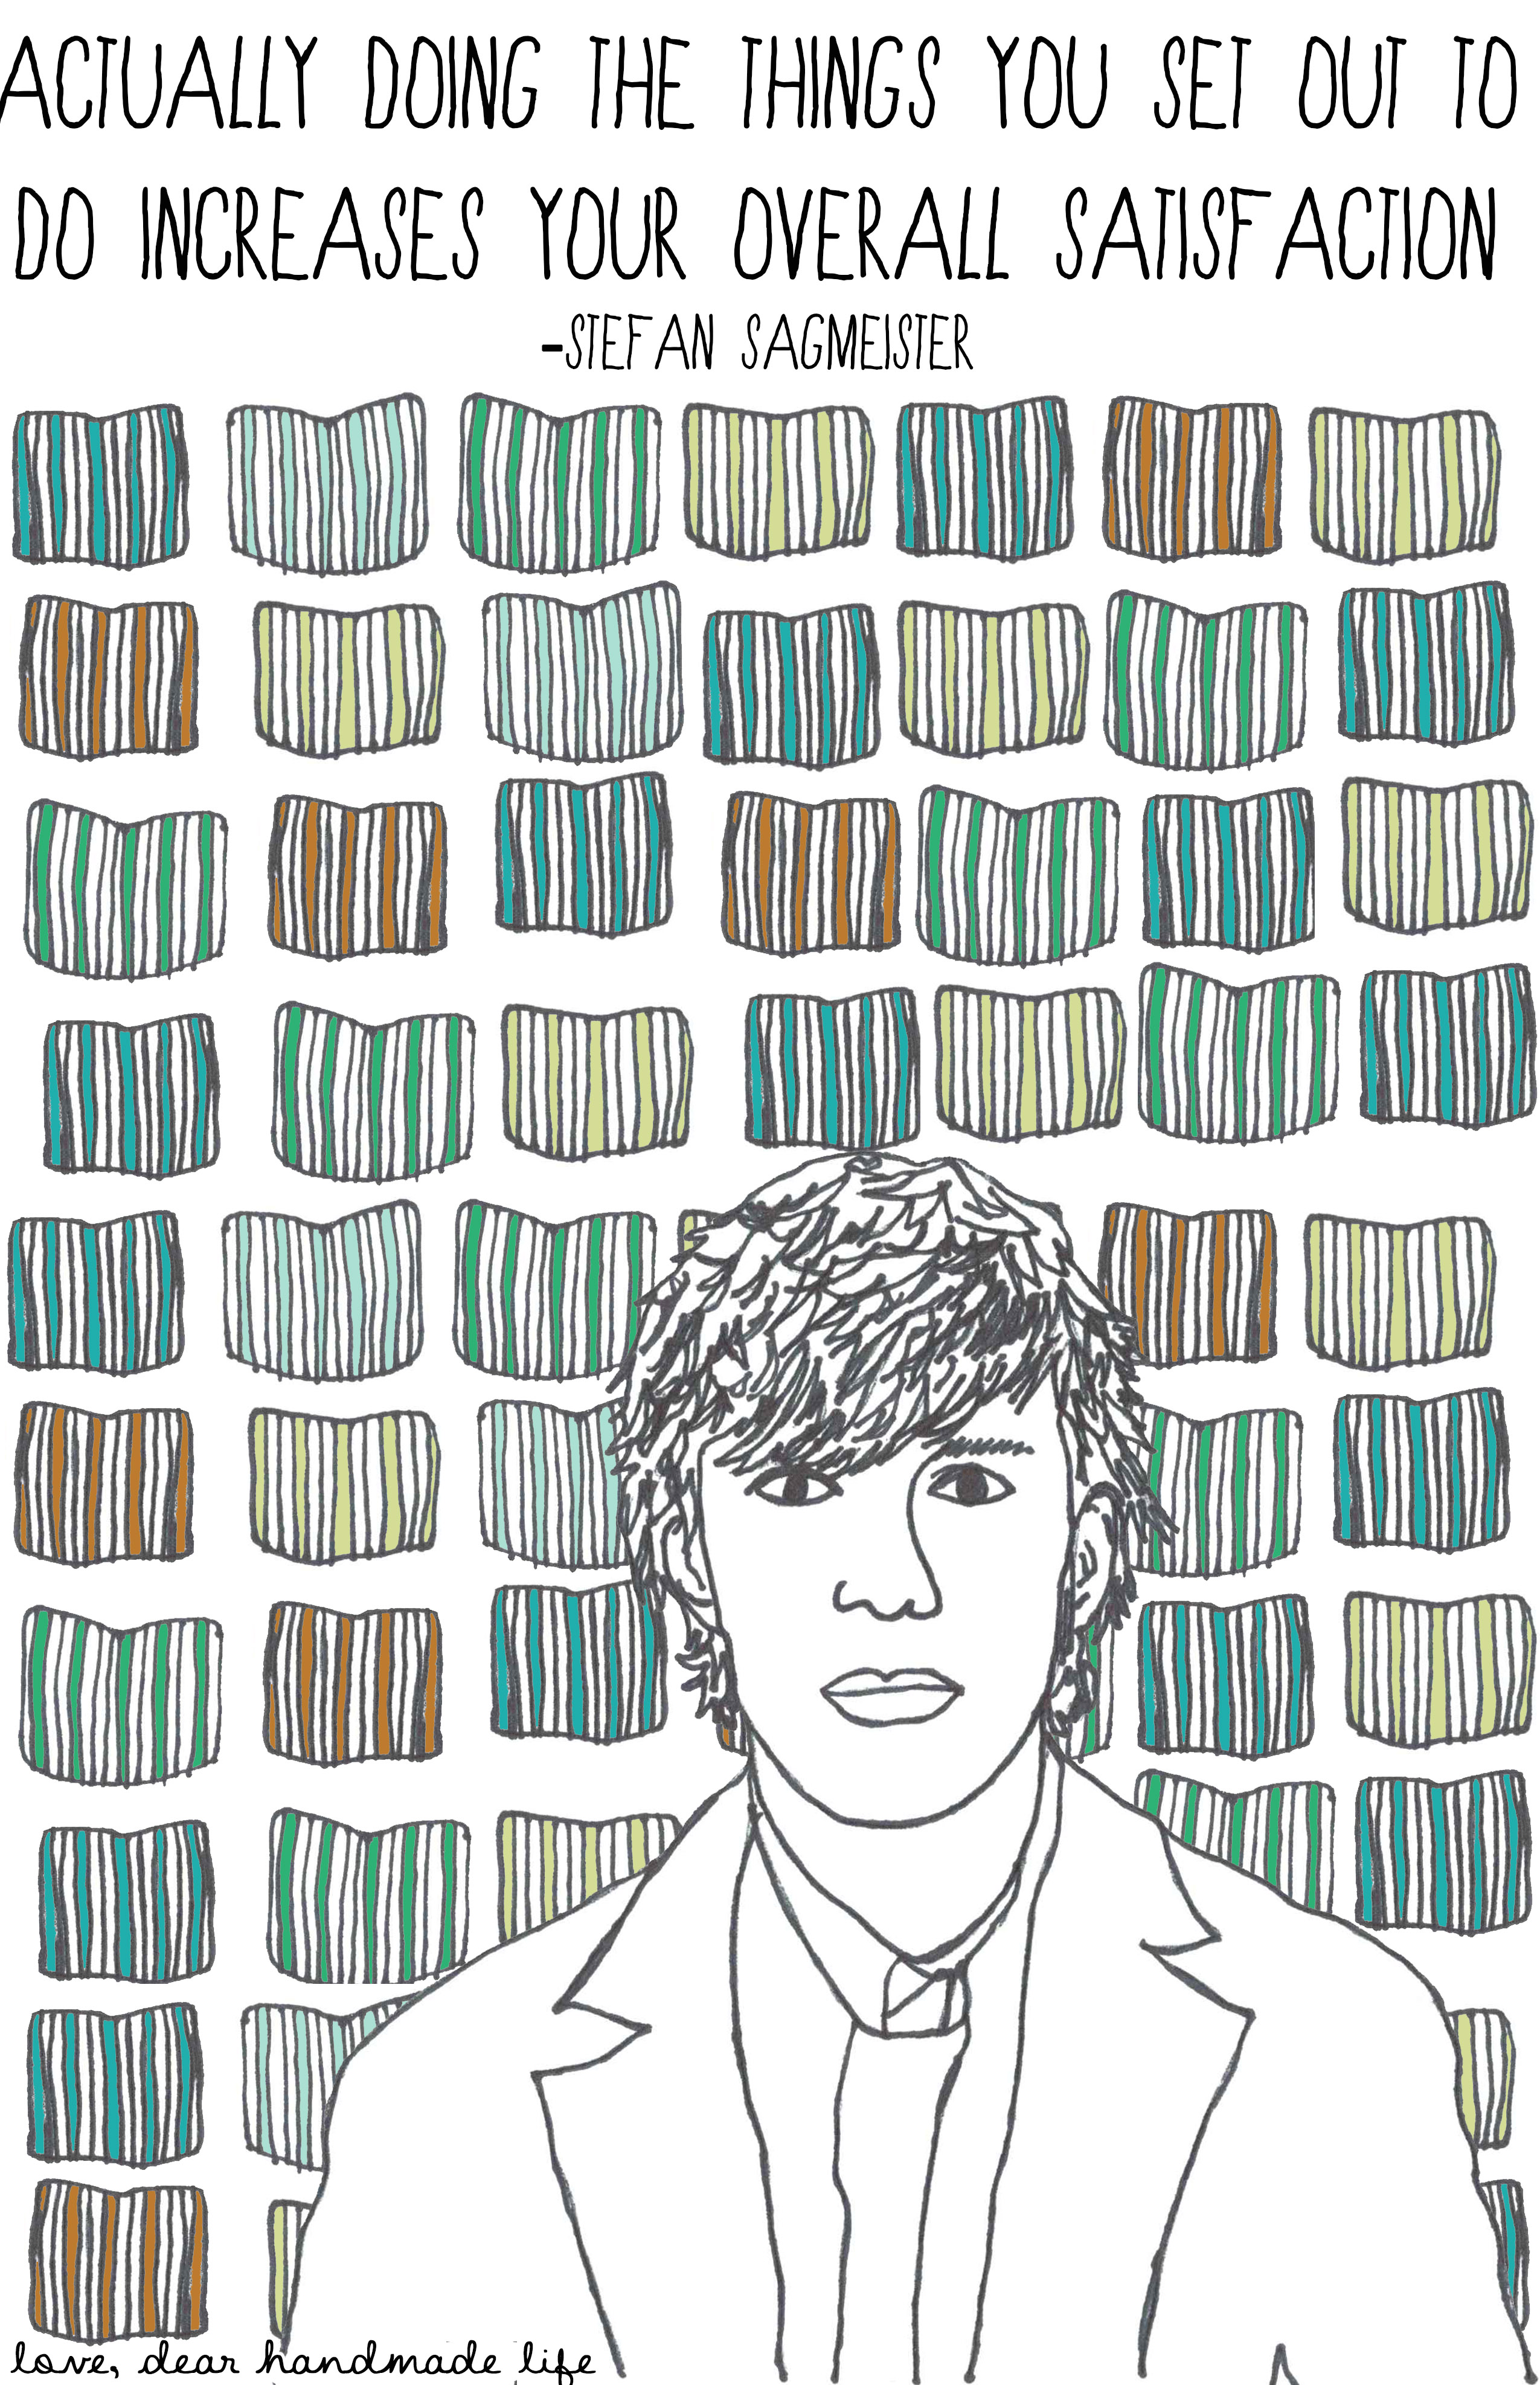 stefan-sagmeister-quote-drawing-book-happy-show-doing-the-things-sketch-art